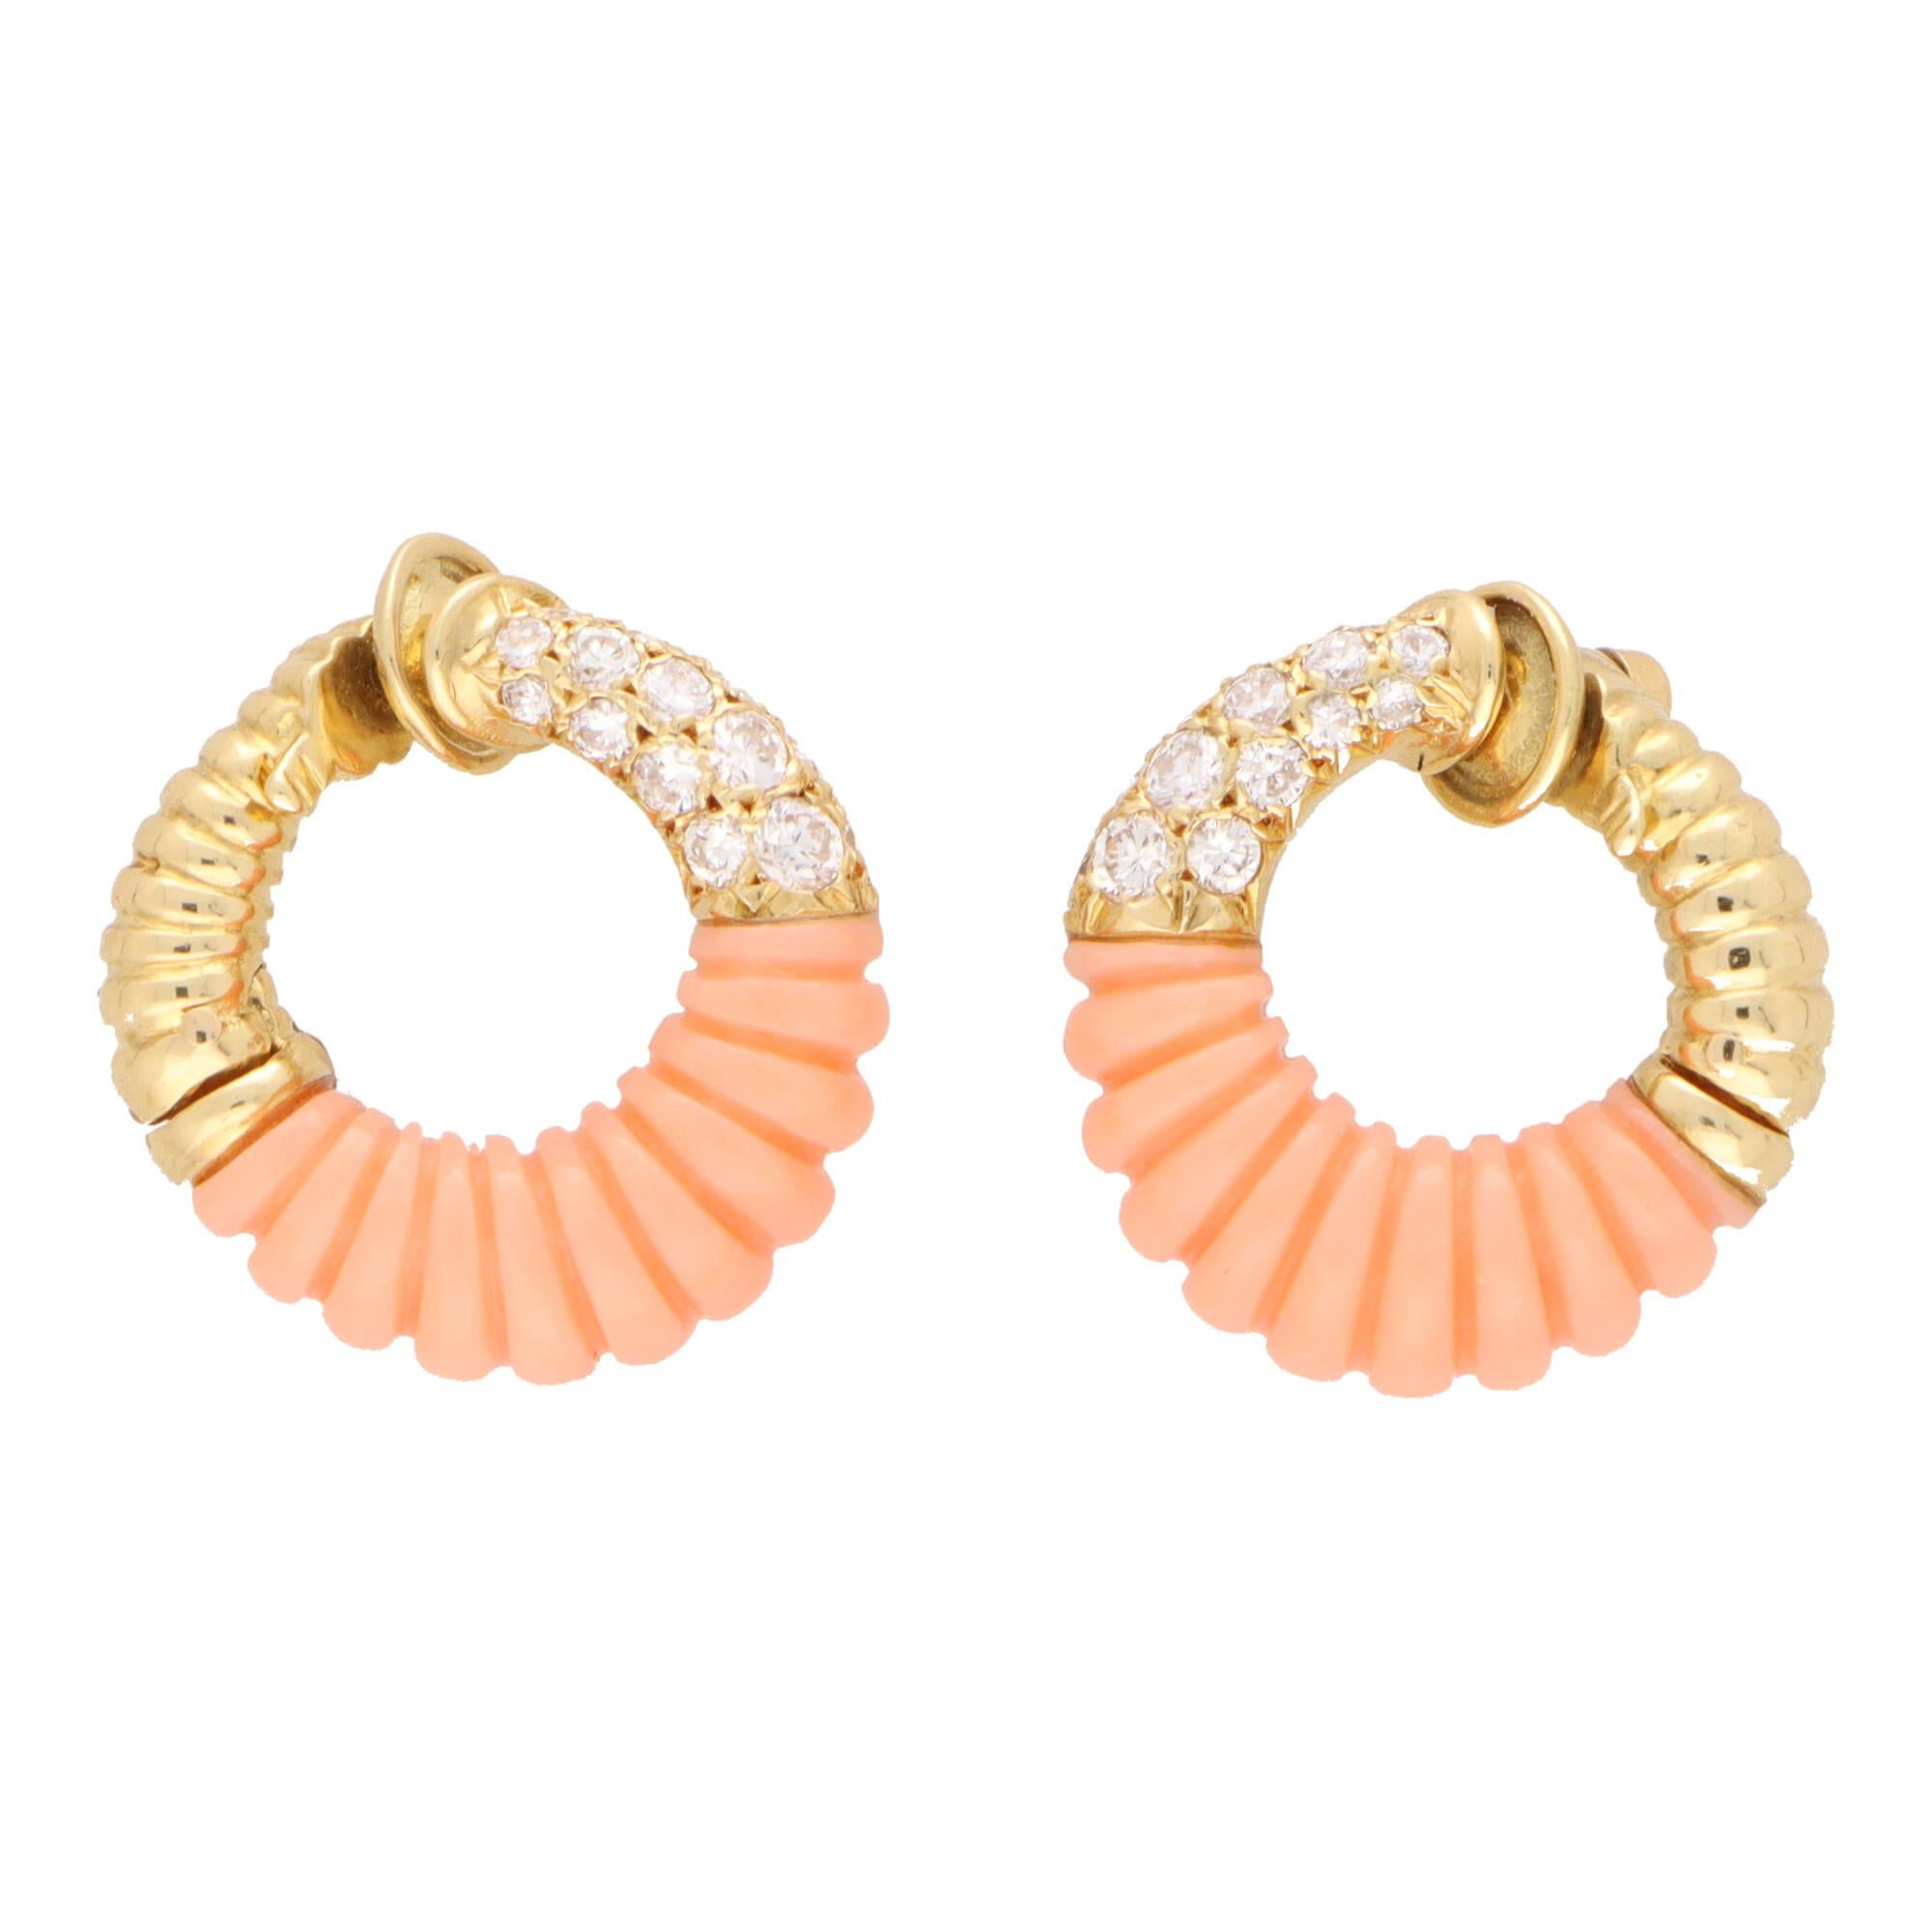 A highly unique vintage pair of Van Cleef & Arpels coral and diamond clip on hoop earrings set in 18k yellow gold.

These beautiful hoops are composed in a graduated circular motif and set to the centre with a carved pinkish-orange piece of coral.